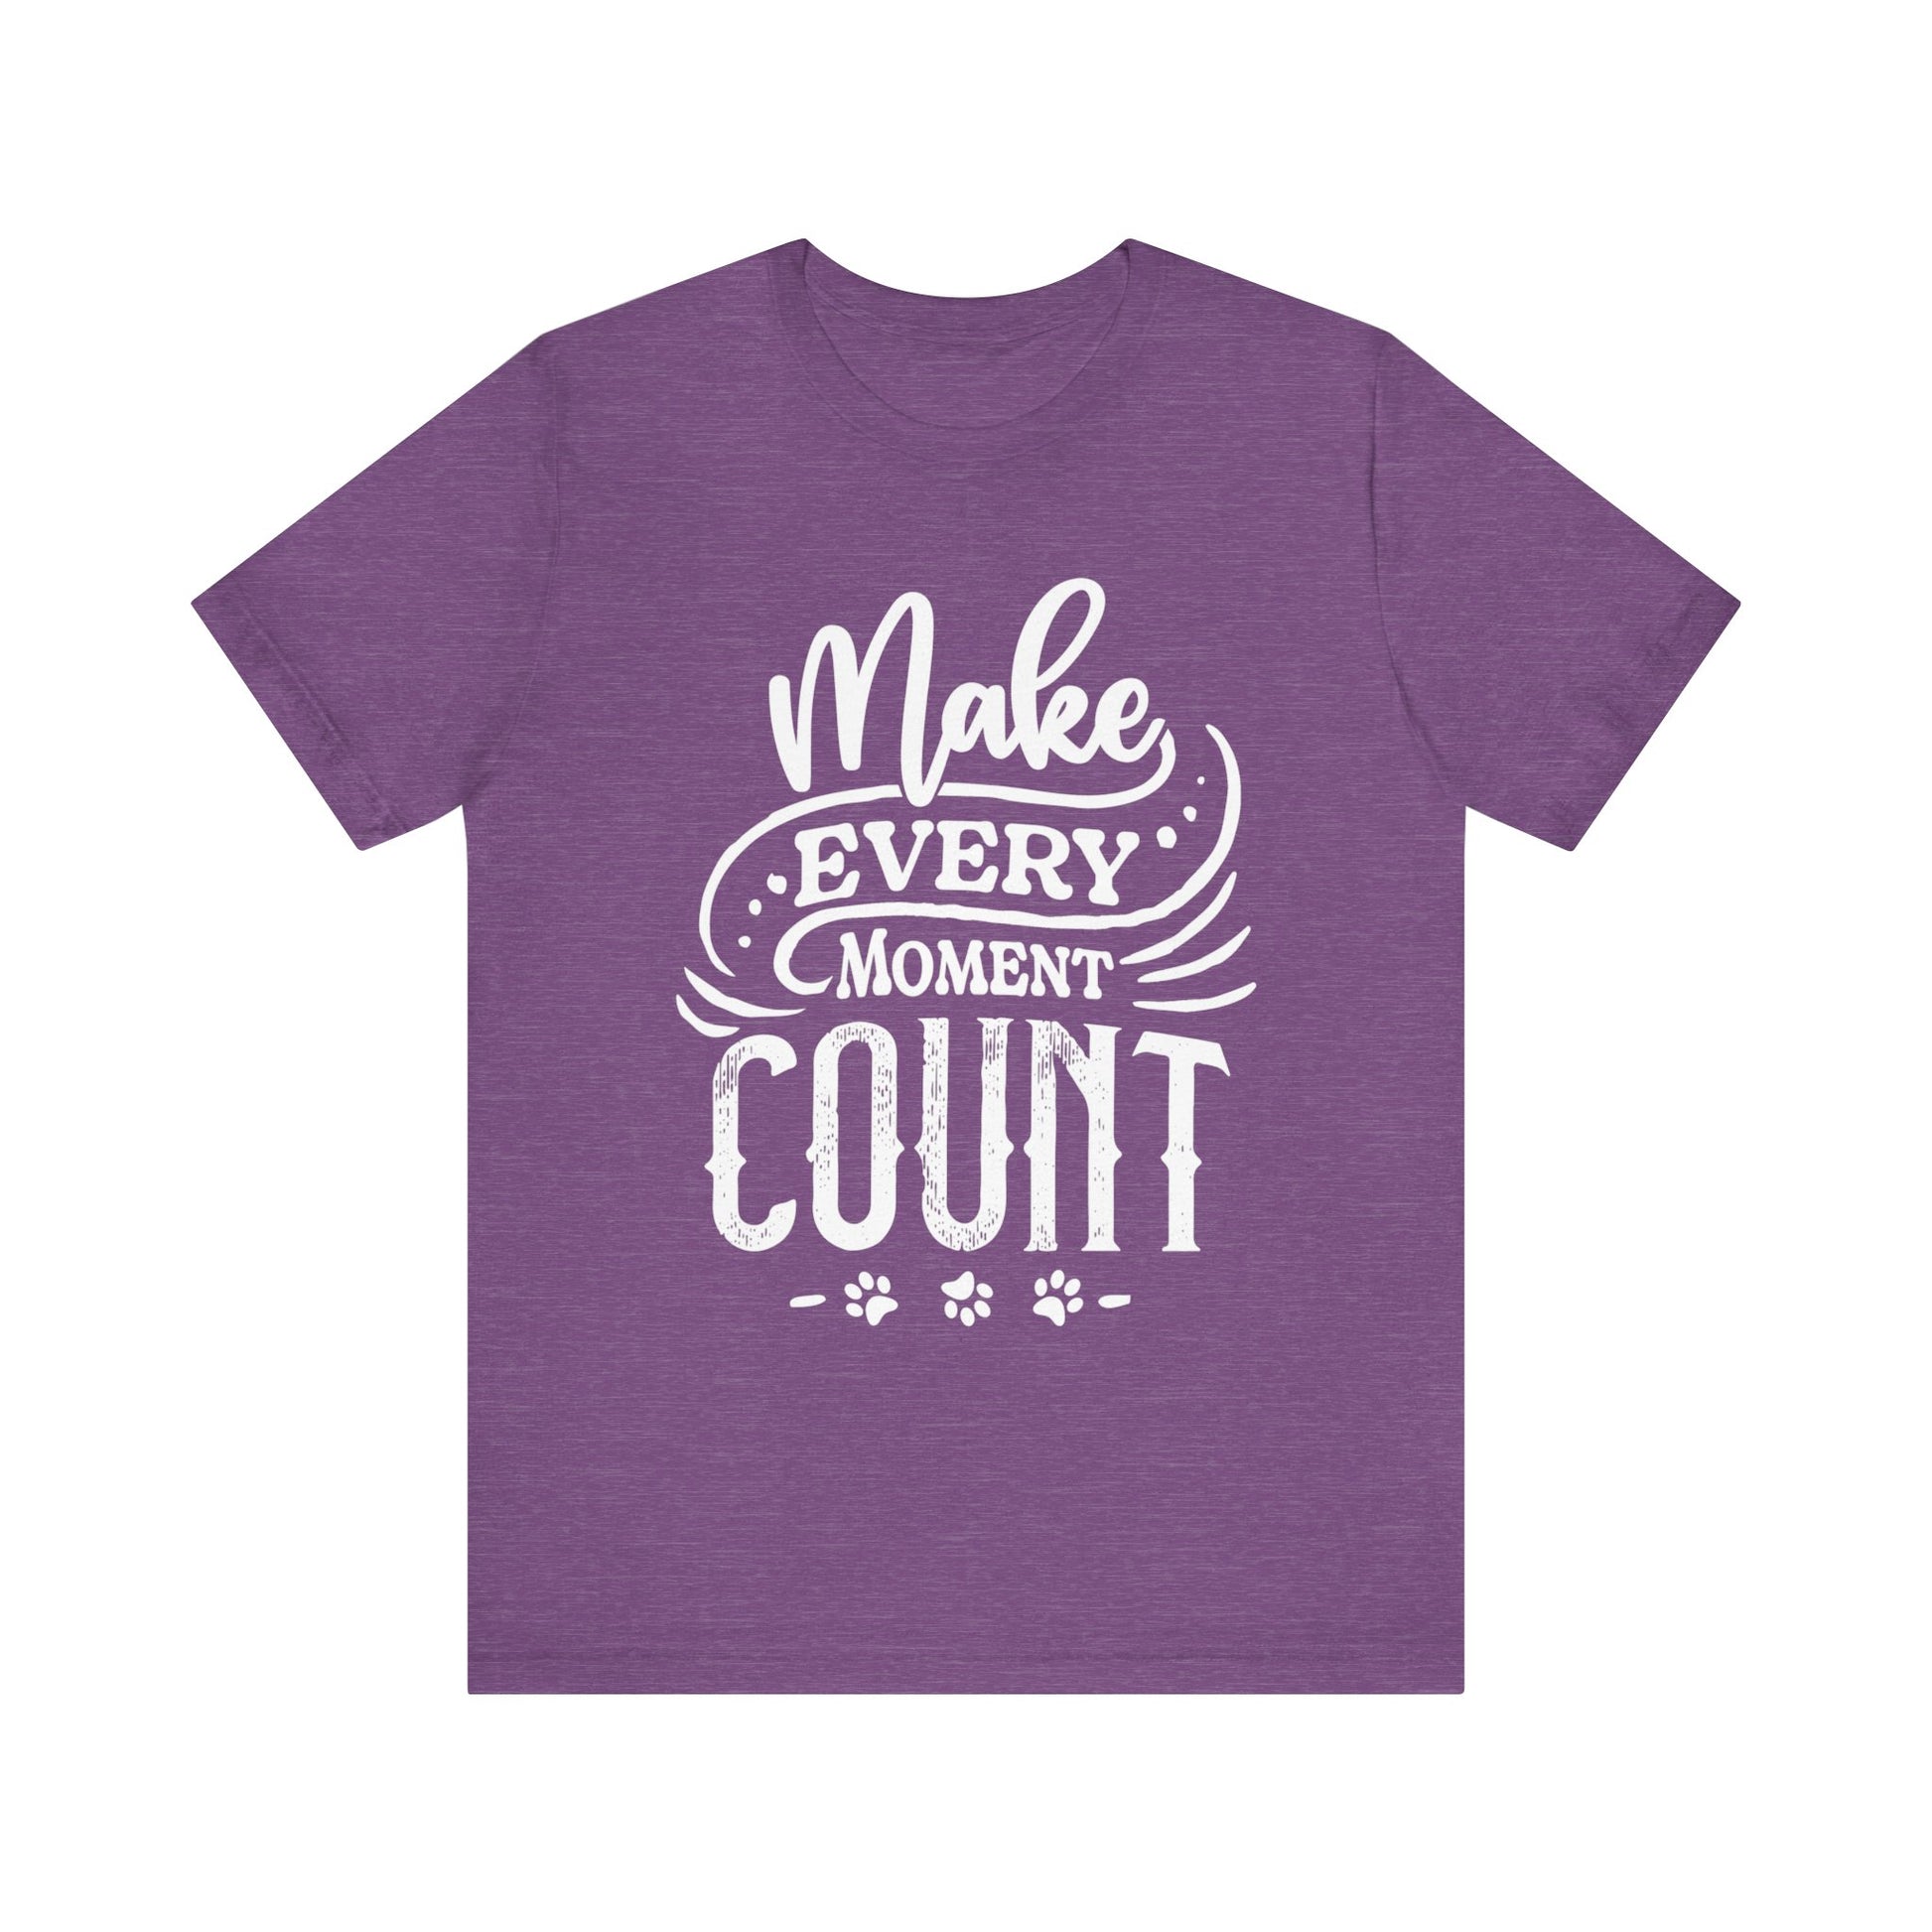 A heather purple unisex tee by Dogs Pure Love features the slogan 'Make Every Moment Count,' against a white backdrop.